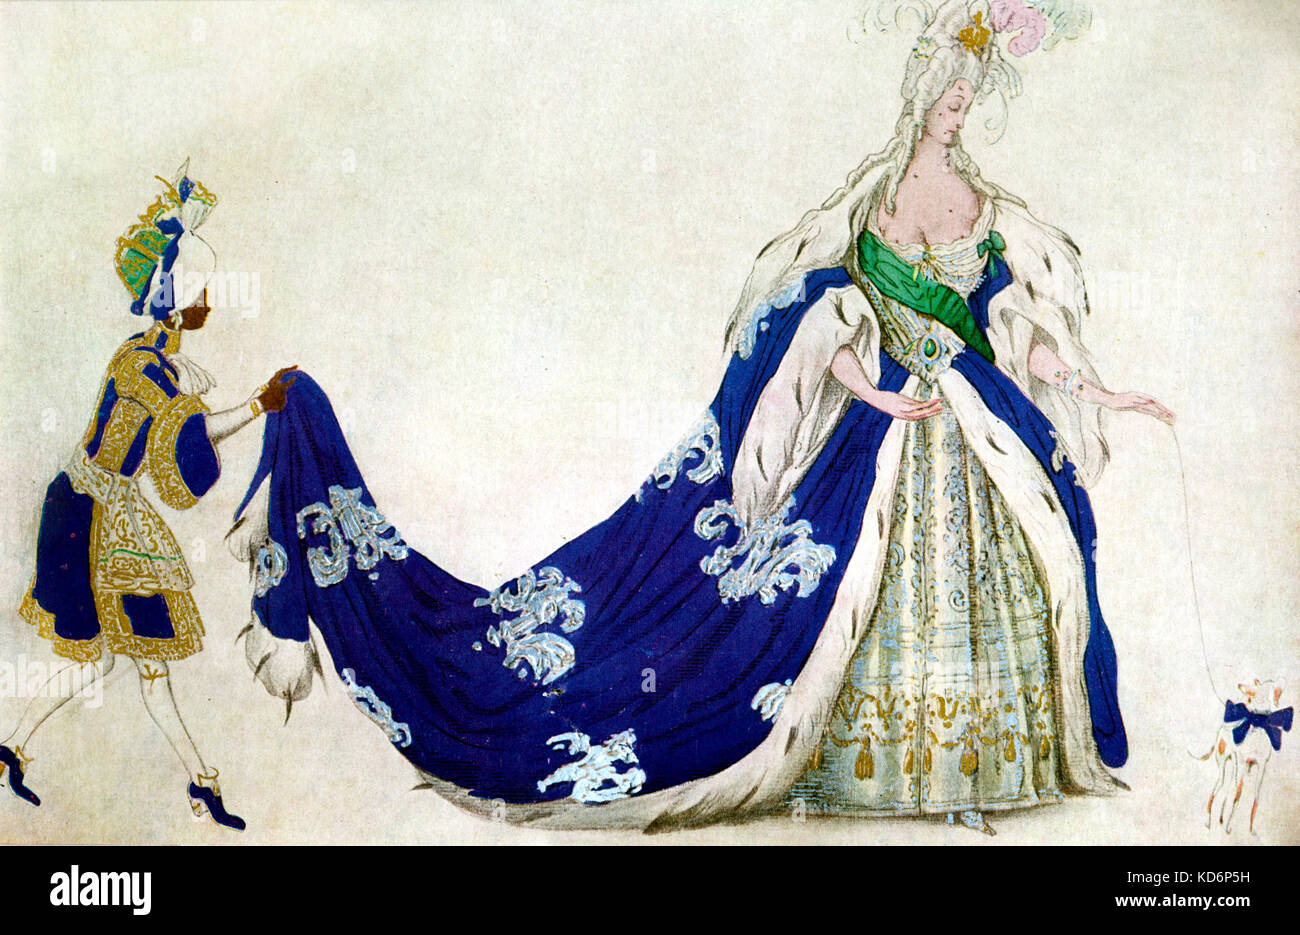 Costume for the Queen / La Reine in ' The Sleeping Princess '/ La Belle au Bois Dormant. ballet .  Music by Tchaikovsky with variations by Stravinsky -  with costume designs by Leon Bakst, 1921. (1866-1924) . Tchaikovsky, Russian composer,  7 May 1840 - 6 November 1893. Stravinsky, Russian composer, 17 June 1882 - 6 April 1971. Stock Photo